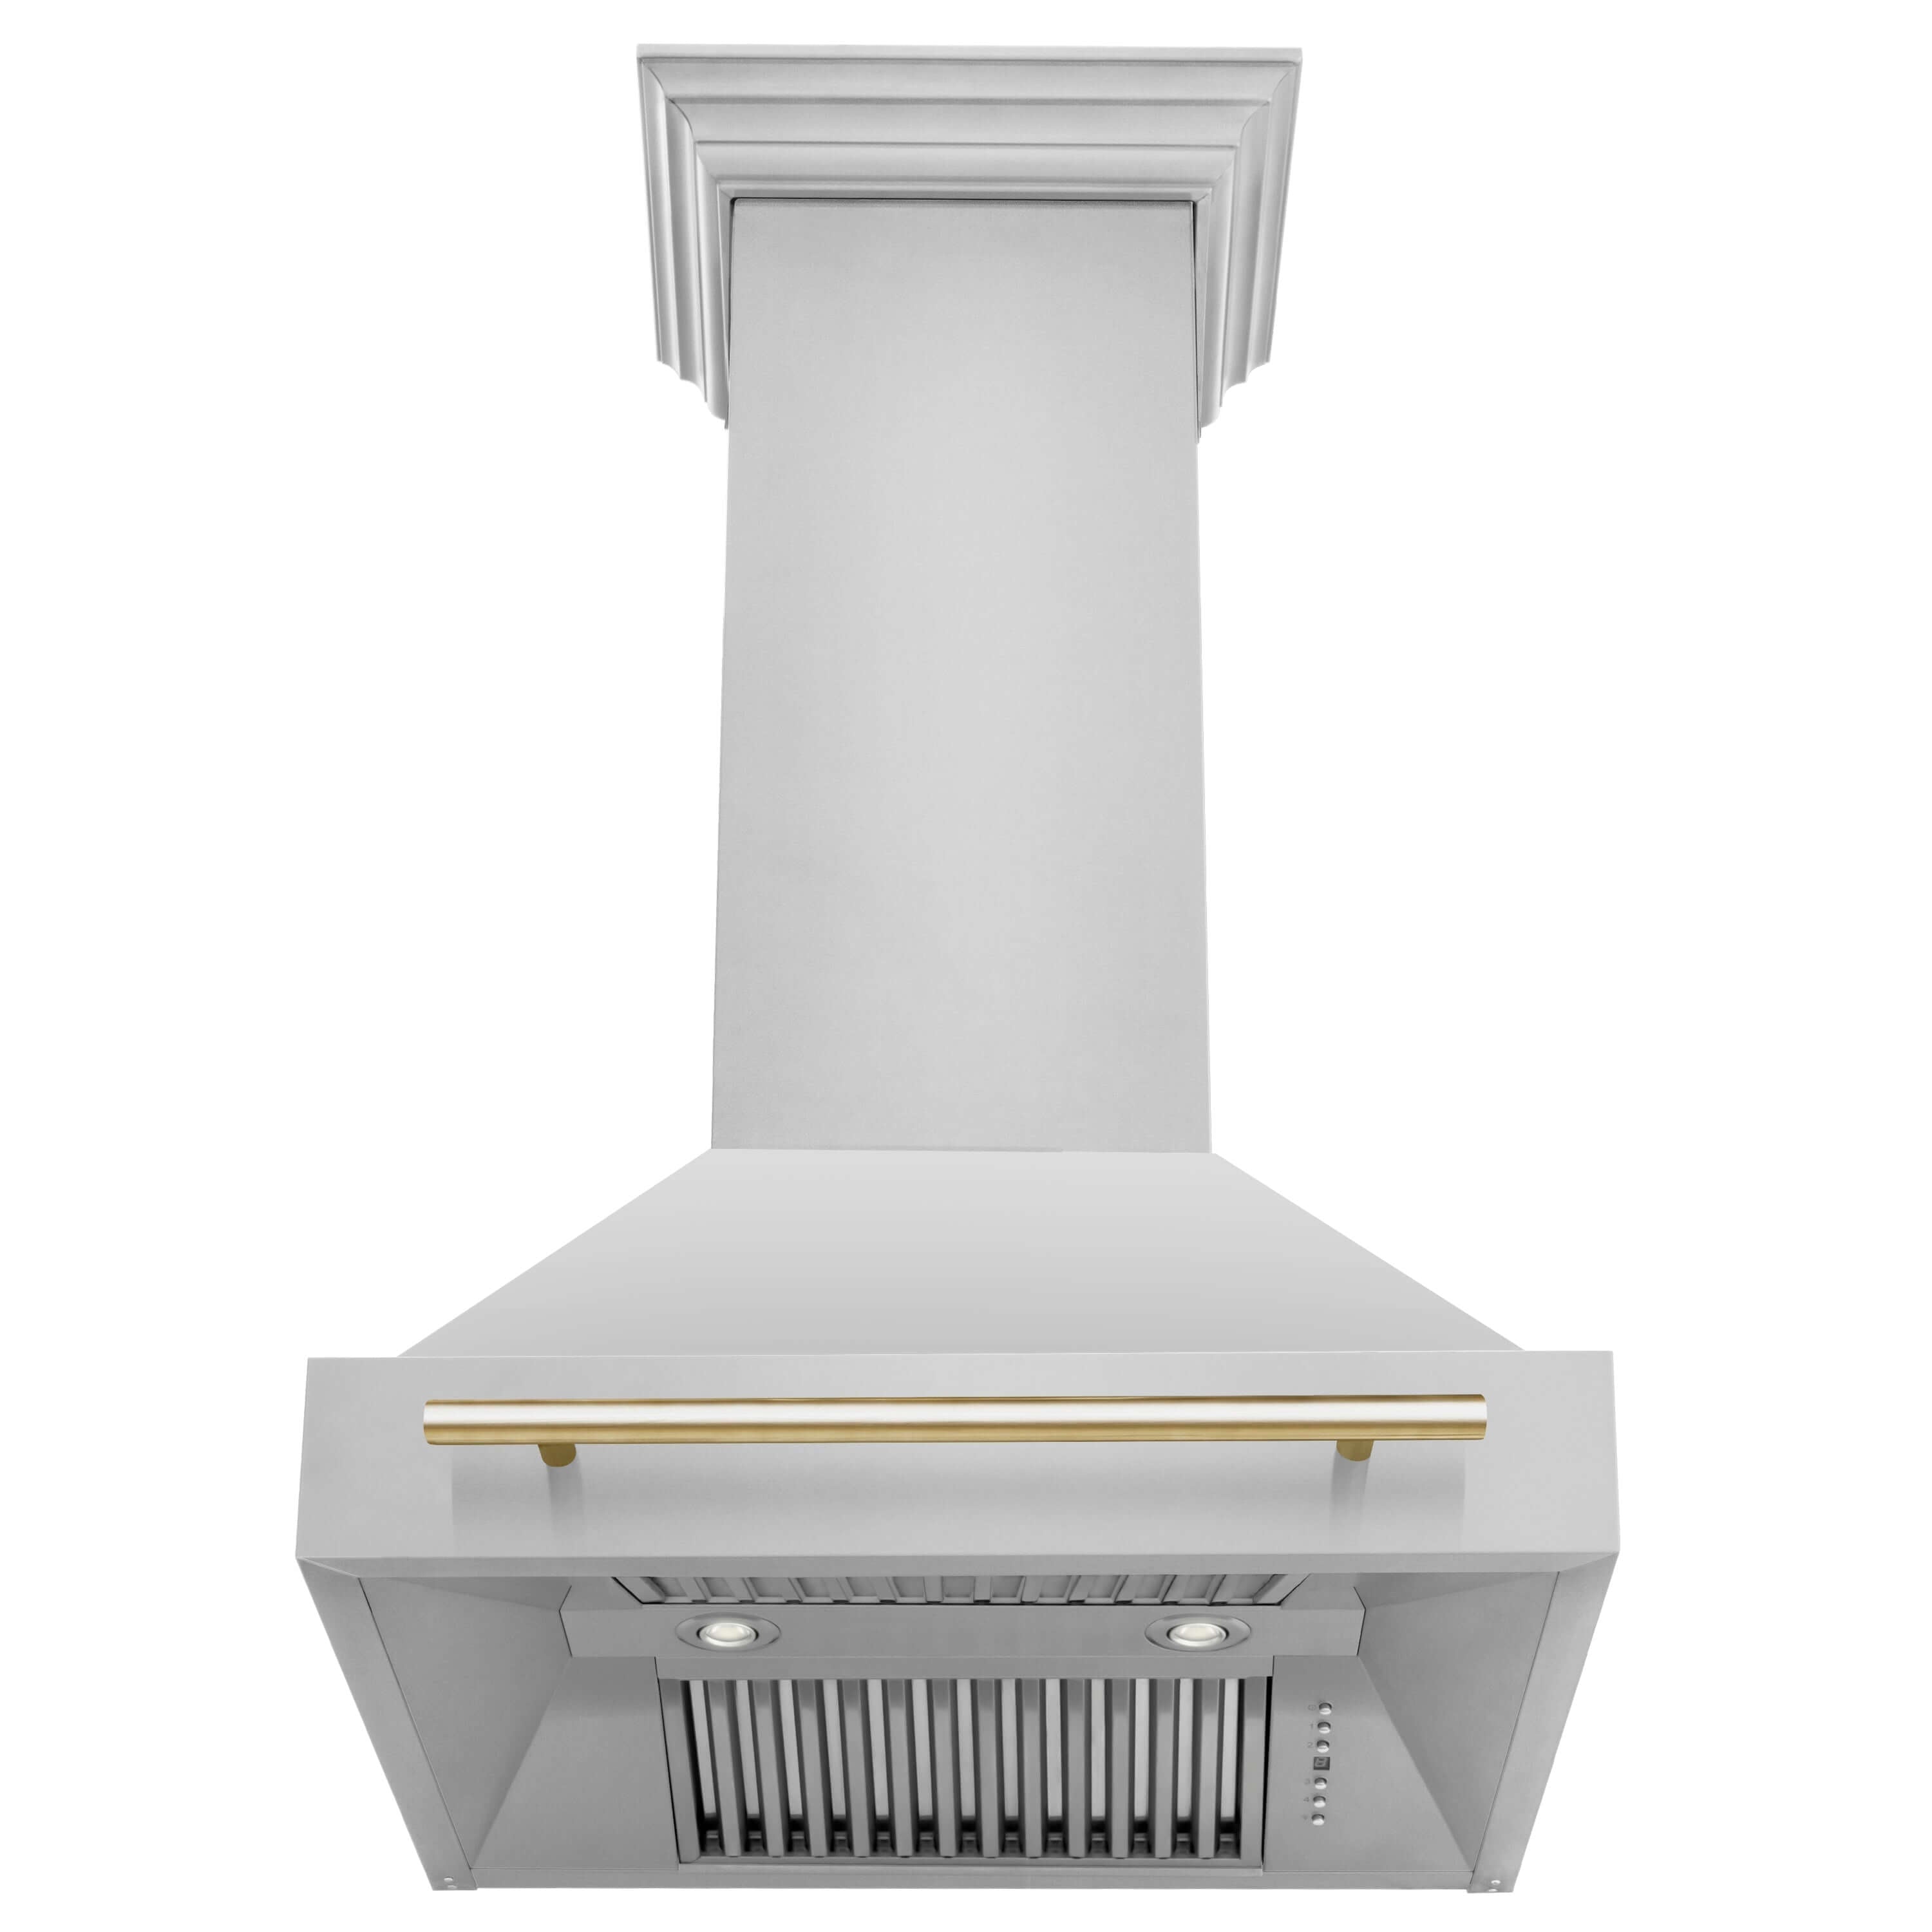 ZLINE 30 in. Autograph Edition Kitchen Package with Stainless Steel Dual Fuel Range and Range Hood with Polished Gold Accents (3AKP-RARHDWM30-G)